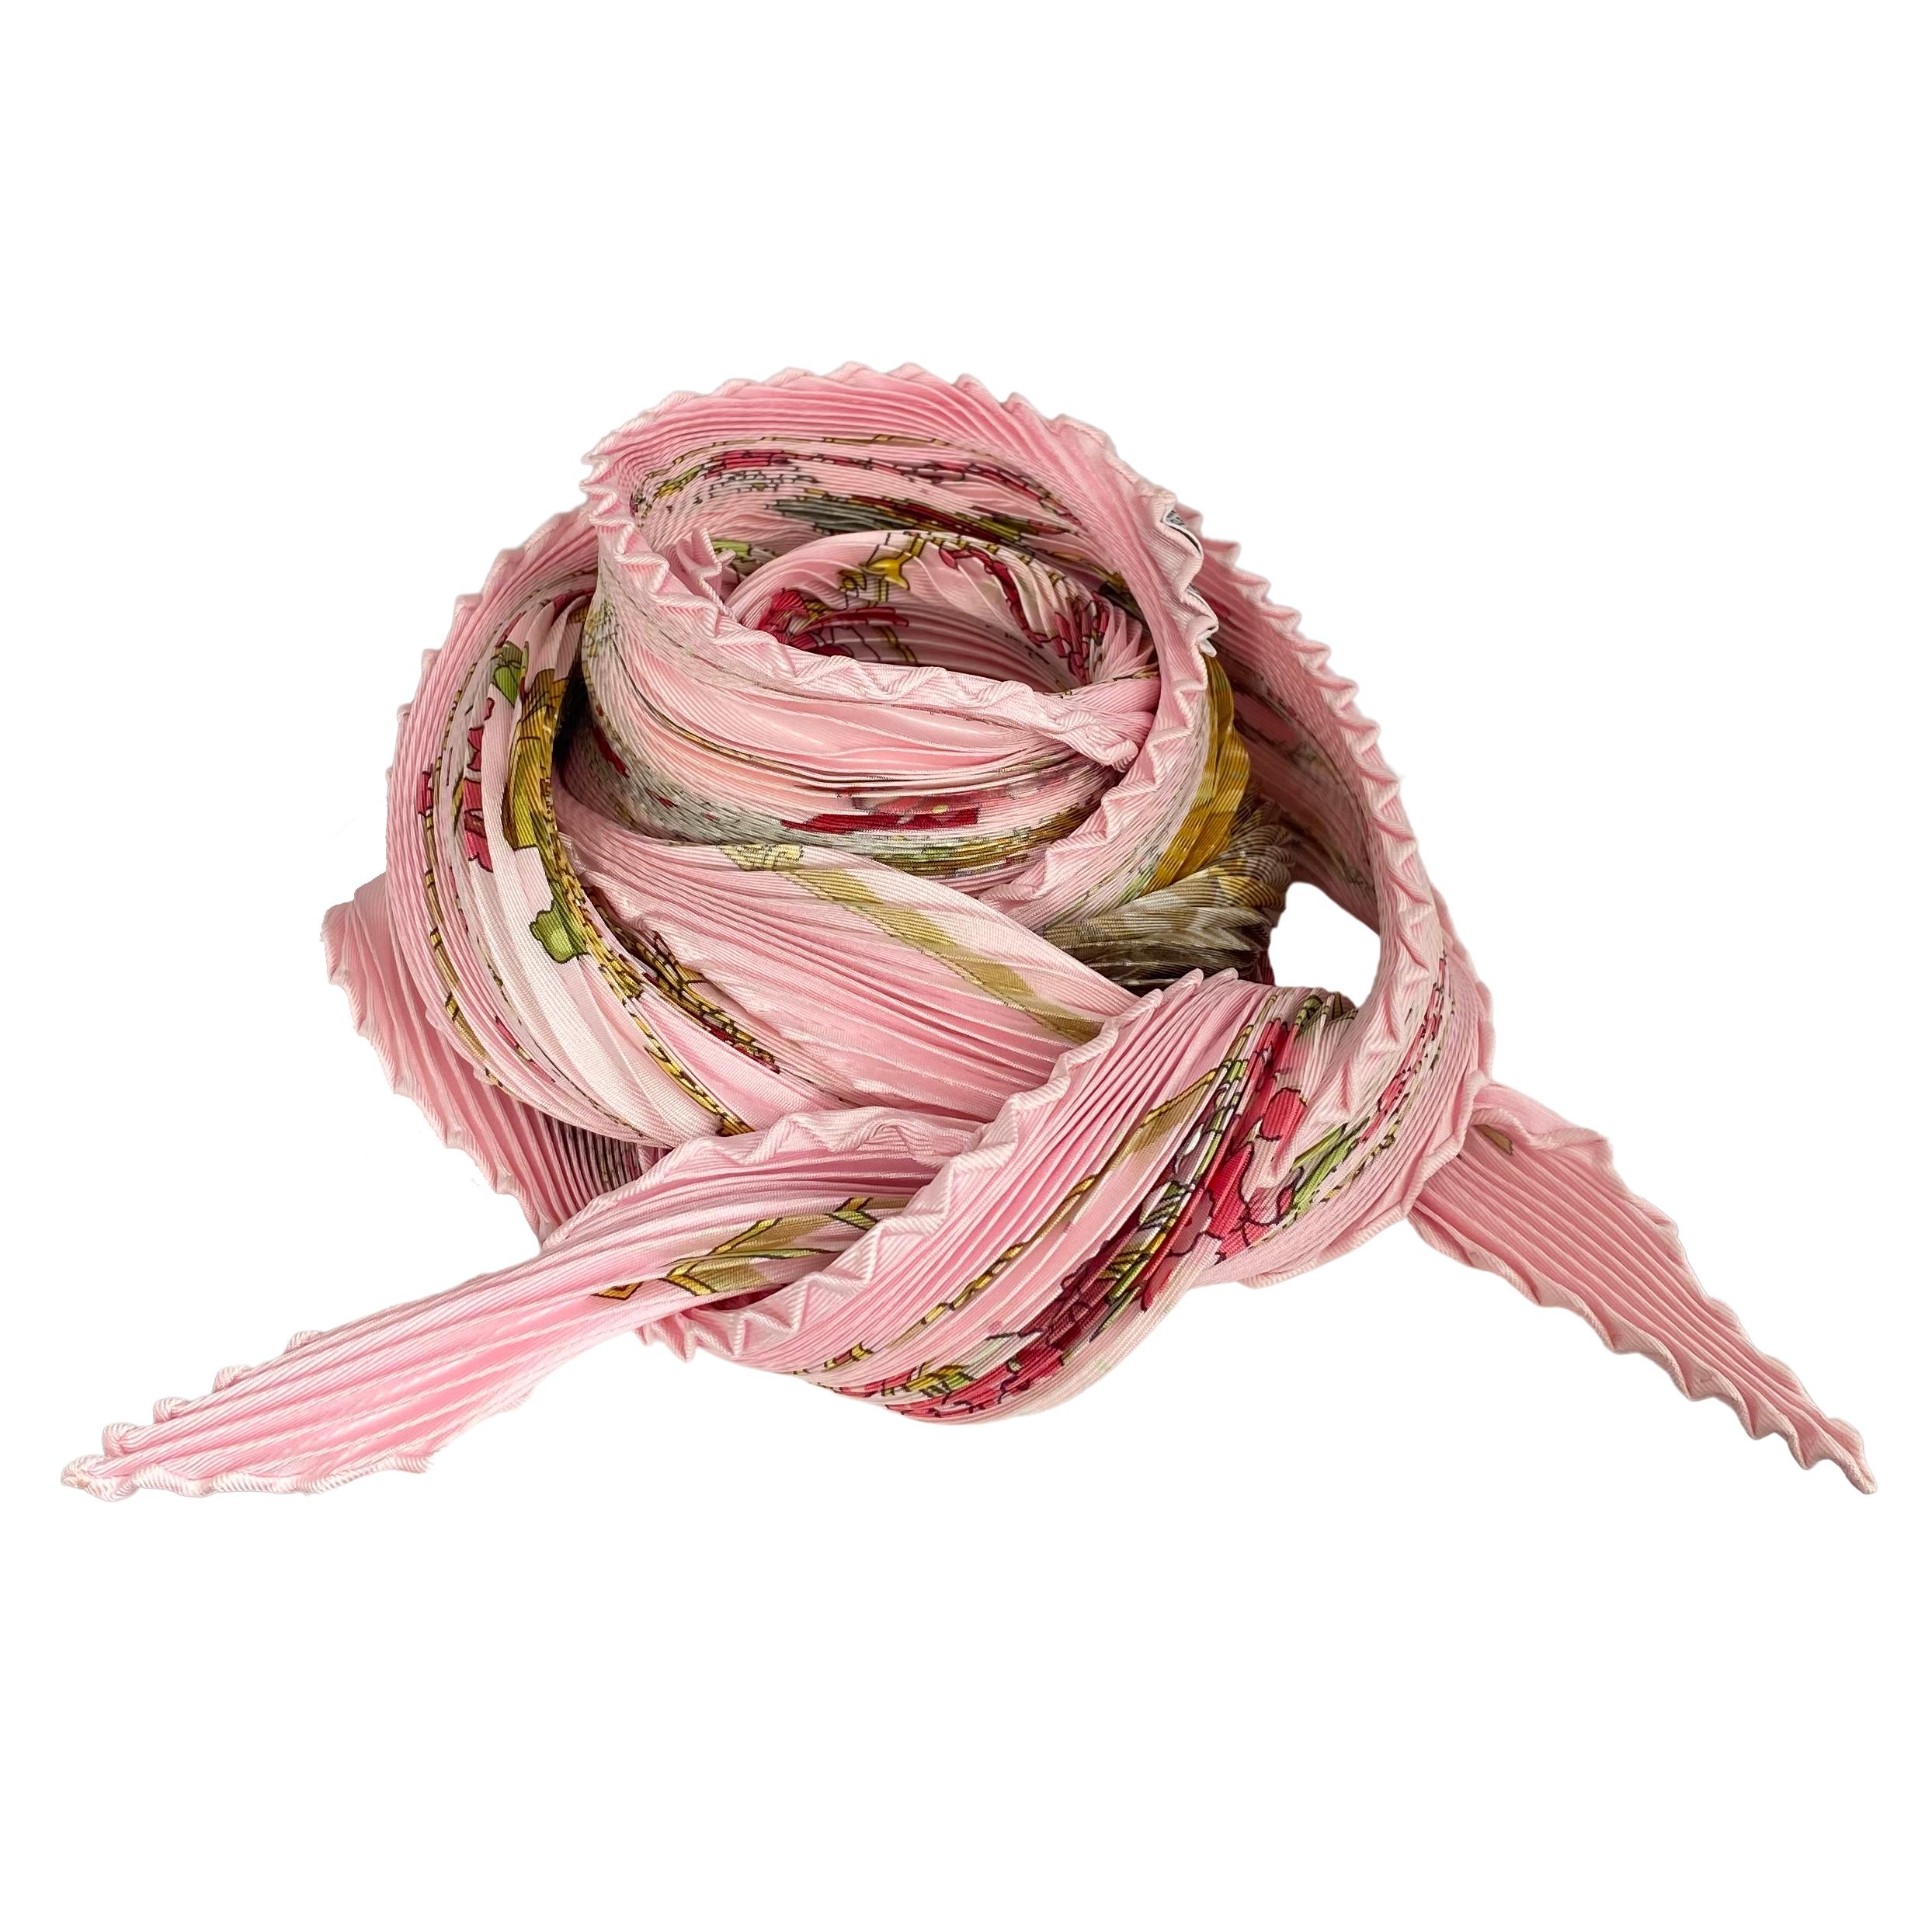 Gorgeous, flattering fresh pink color!
Brand new Hermès LES PETITS PRINCES Pink Plisse Scarf Silk Twill NIB.
There are other LES PETITS PRINCES Hermes scarves but extremely rare to find a NIB one in Plissé or in Pink color.
Ship with original round